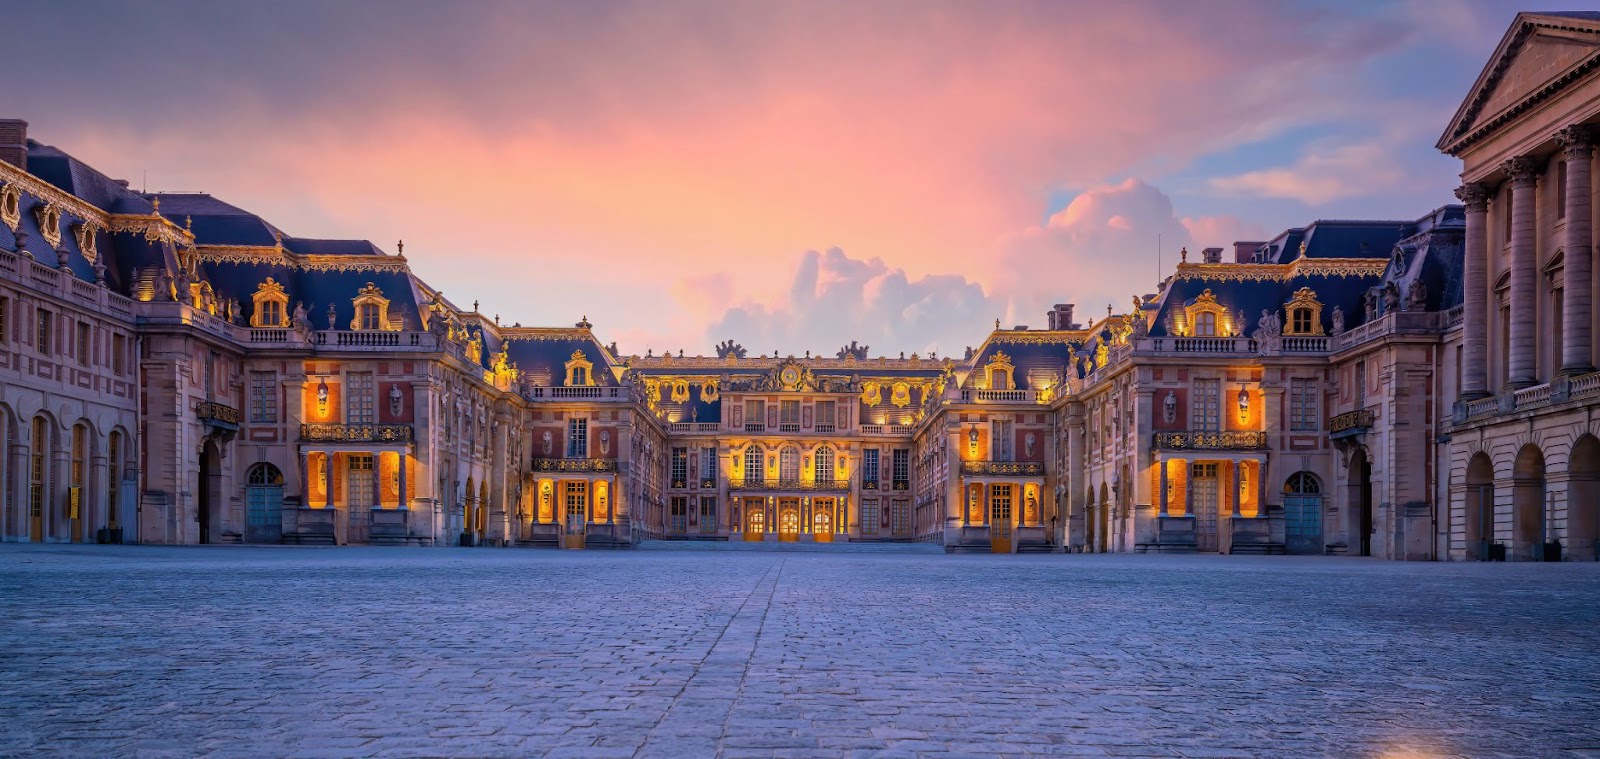 The Palace Of Versailles, France - 23 Top Sights to See Before You Die